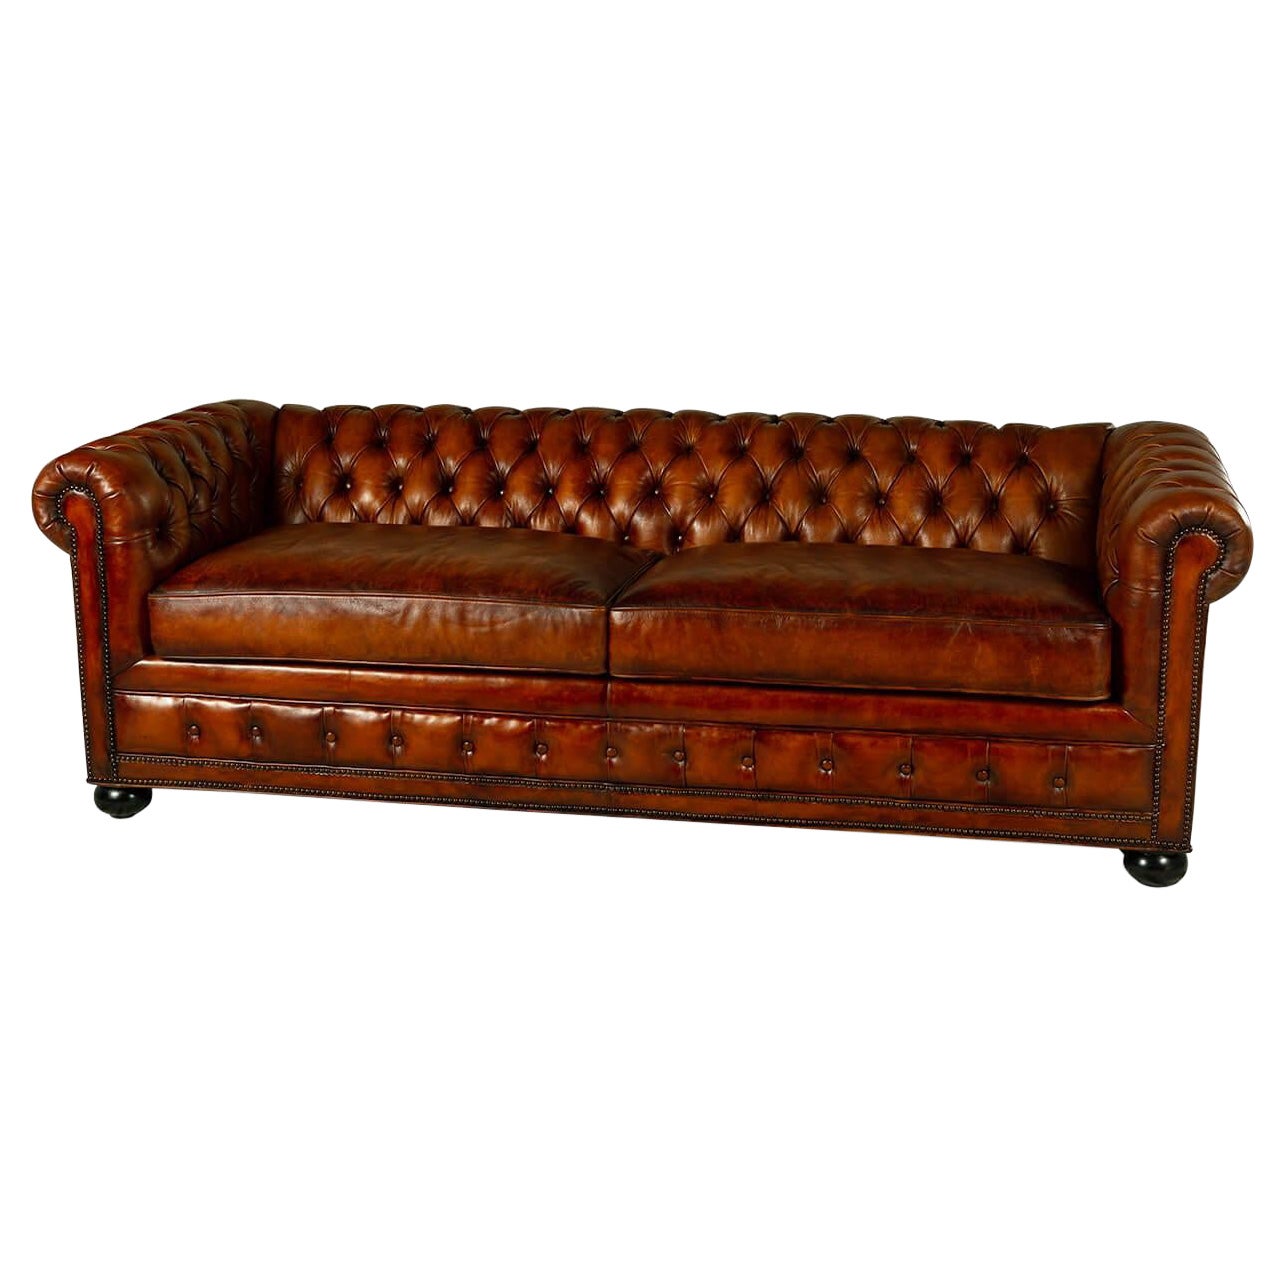 Antiqued Chesterfield Leather Sofa